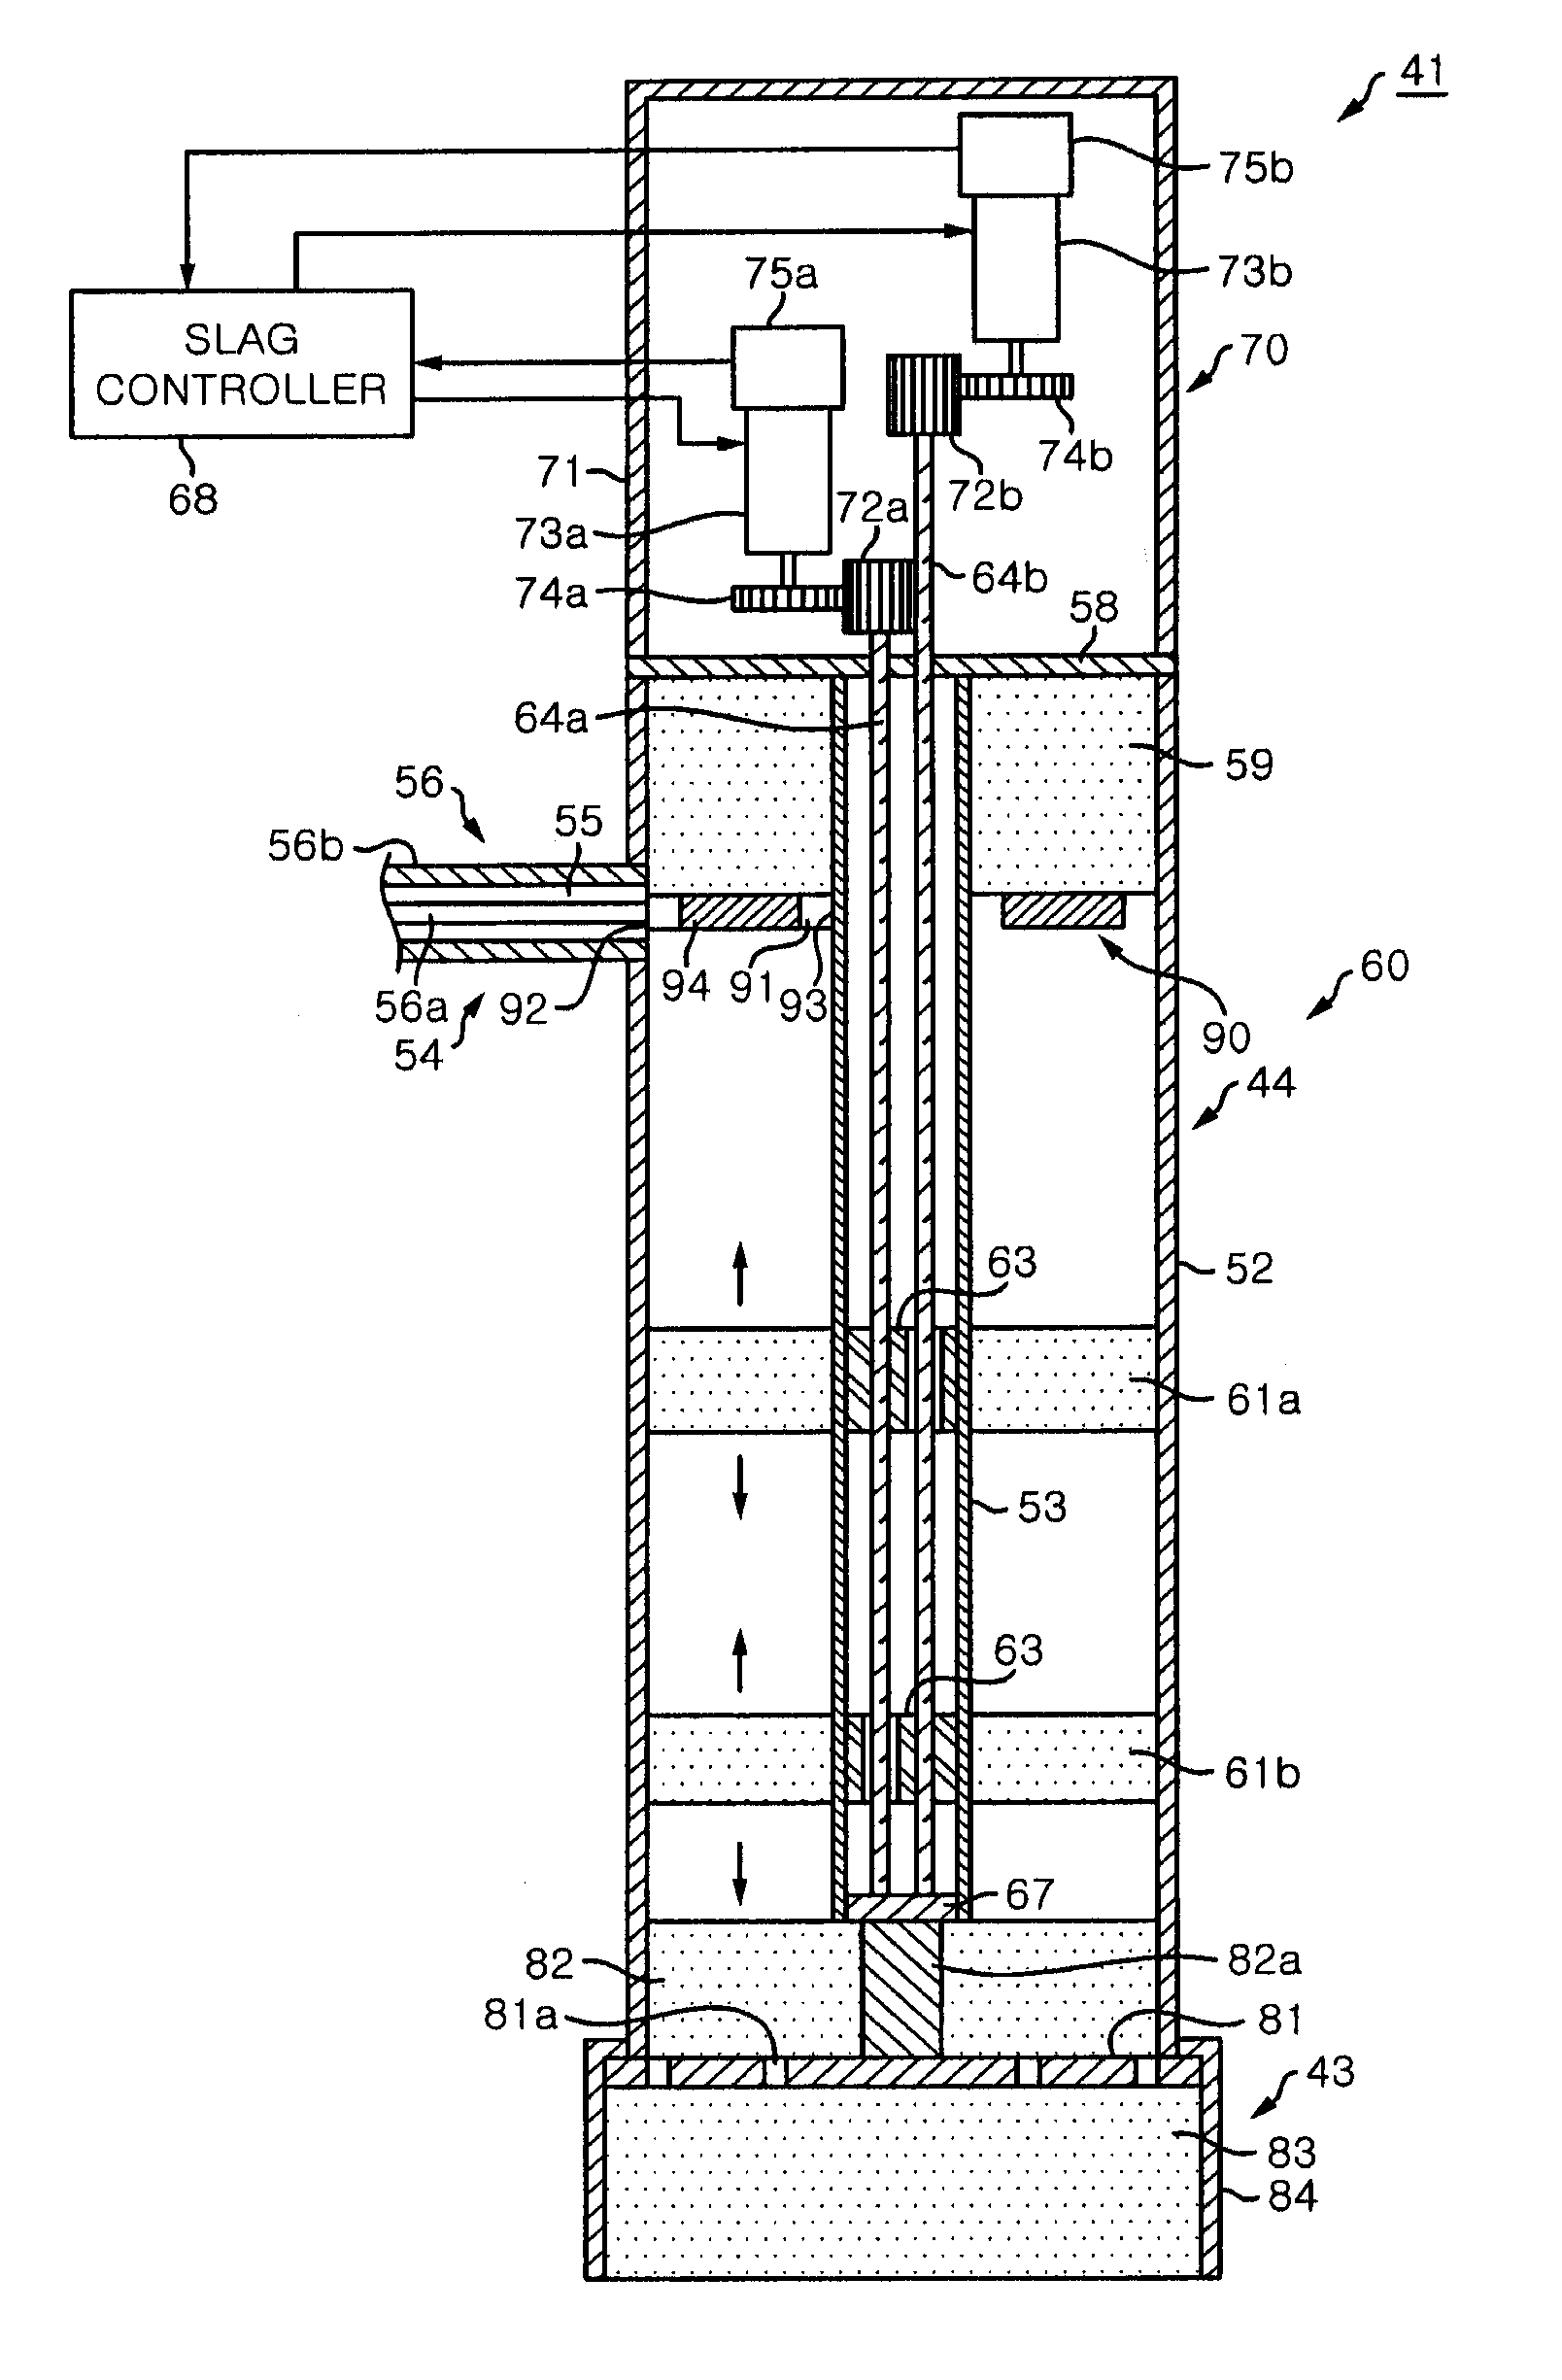 Electromagnetic-radiation power-supply mechanism for exciting a coaxial waveguide by using first and second poles and a ring-shaped reflection portion